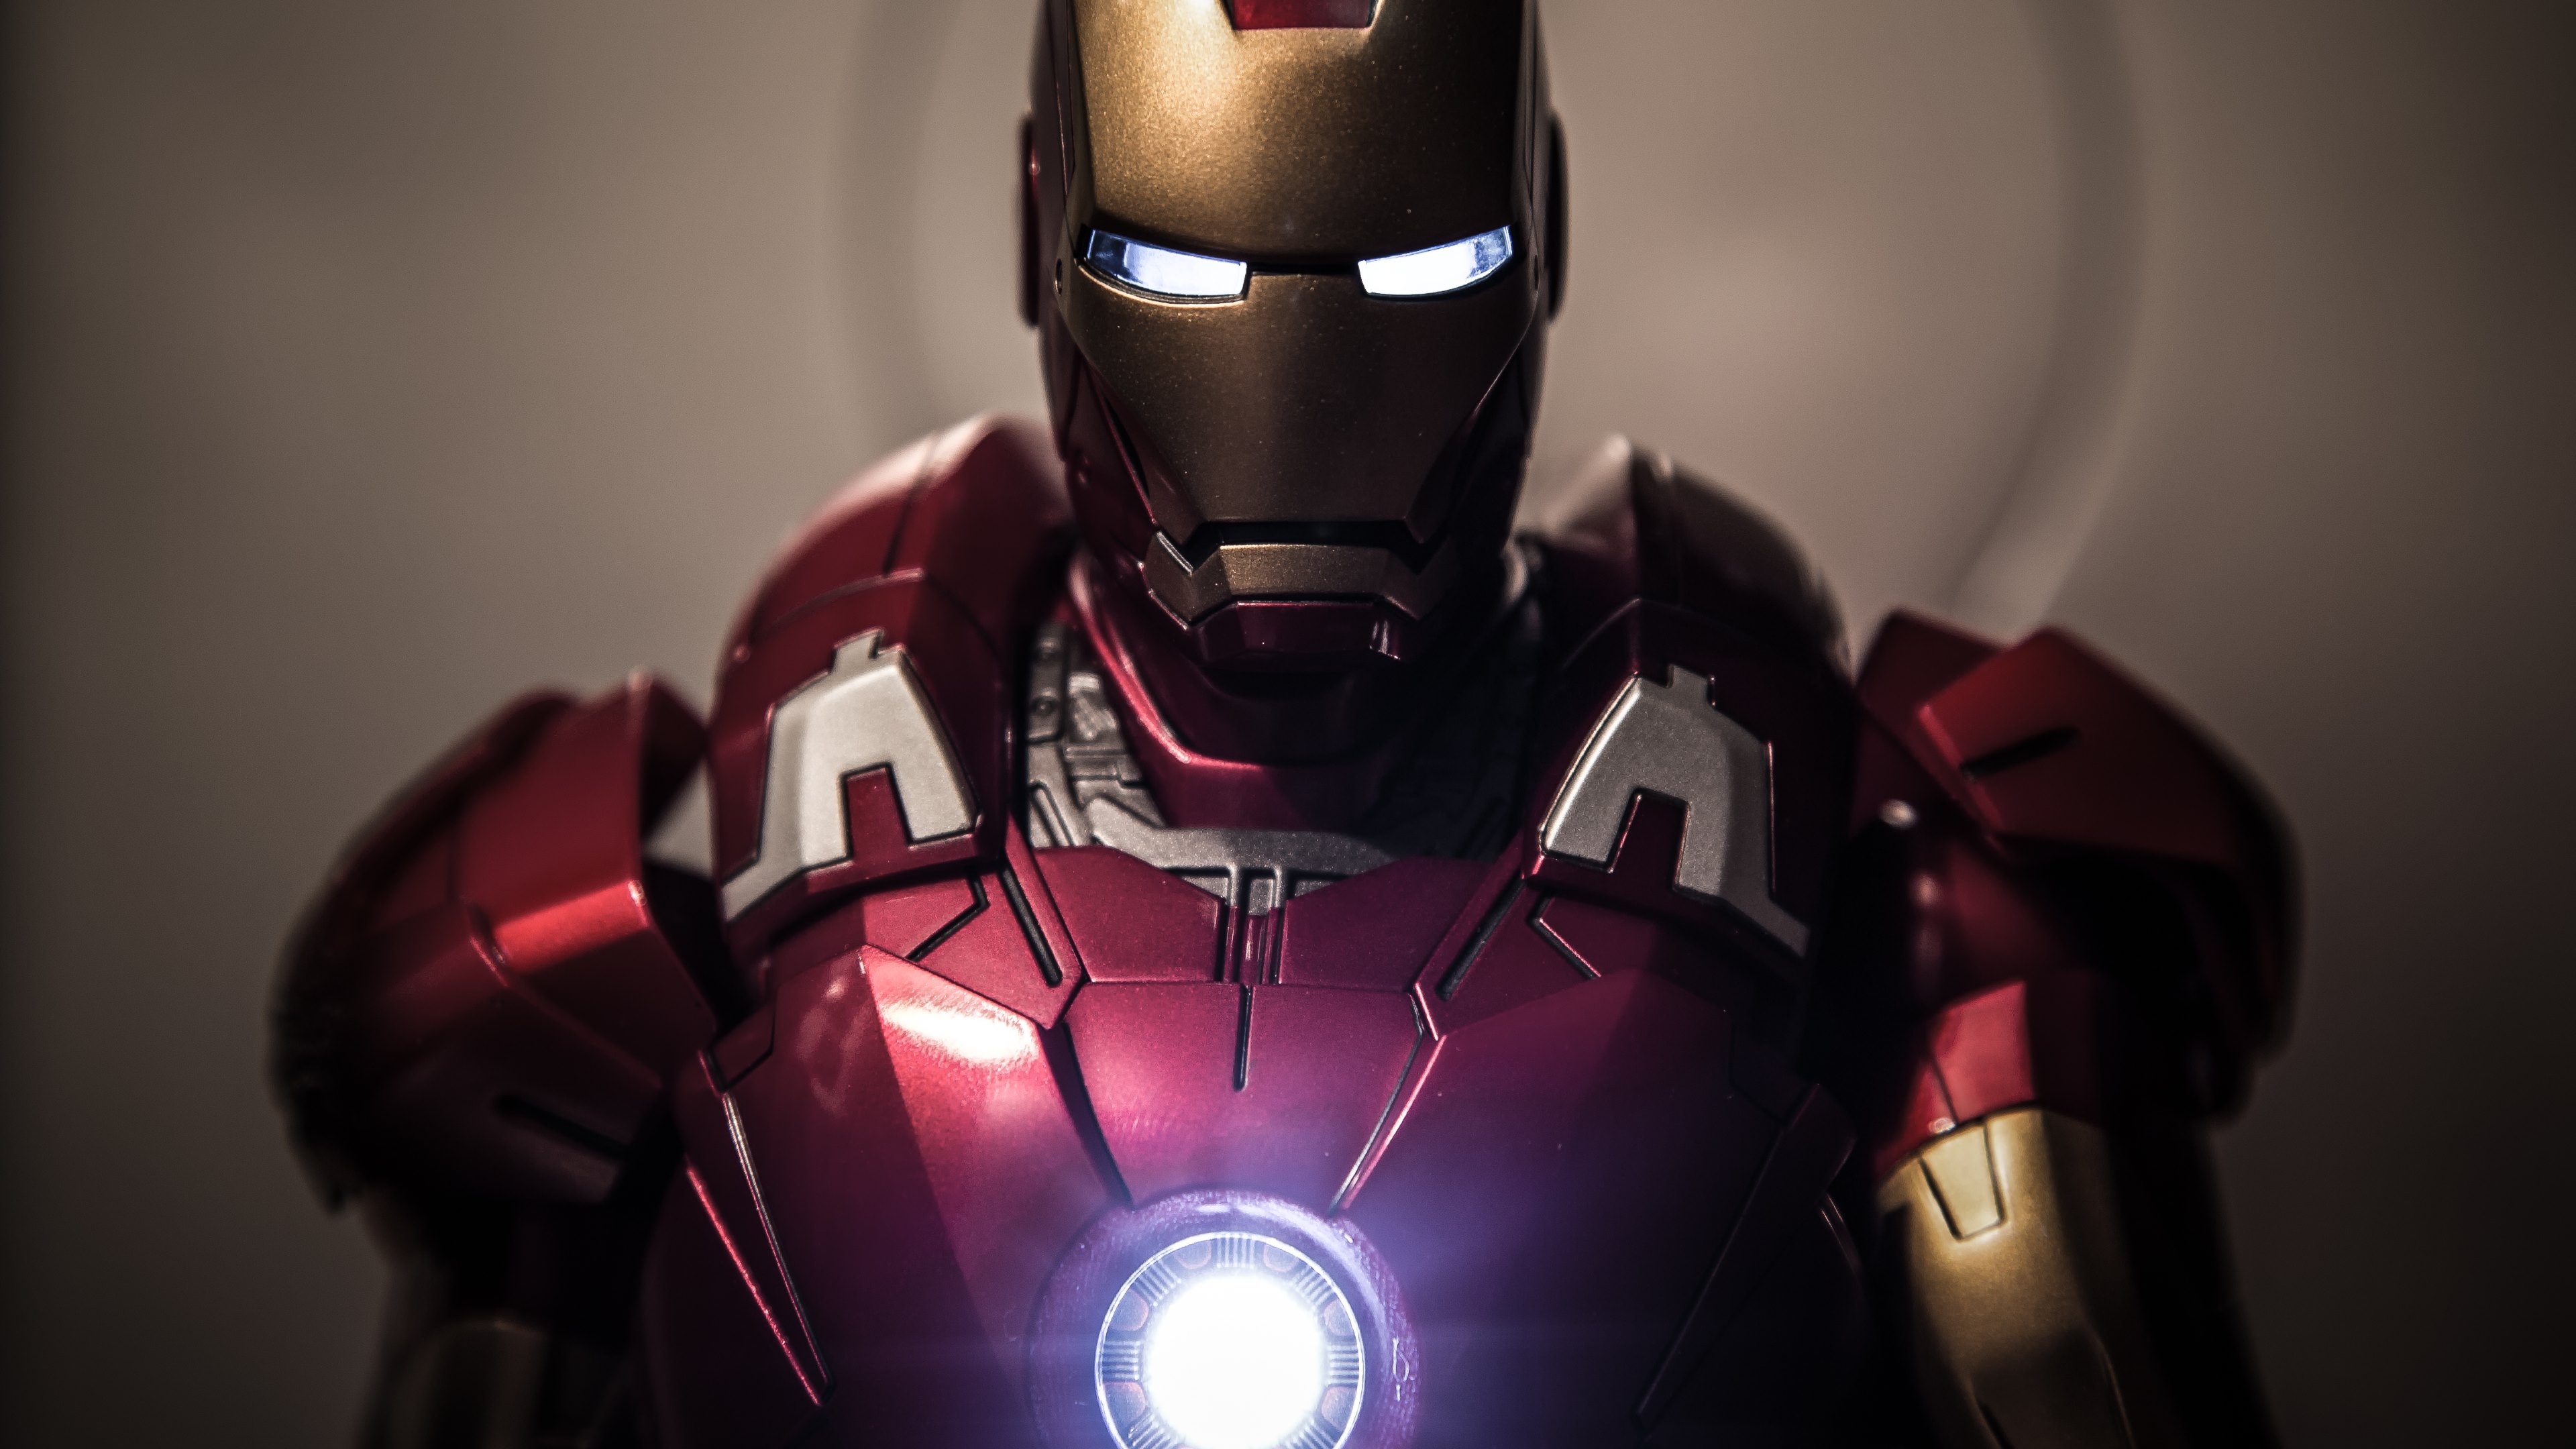 iron man, movie, figurine, toy wallpaper for mobile